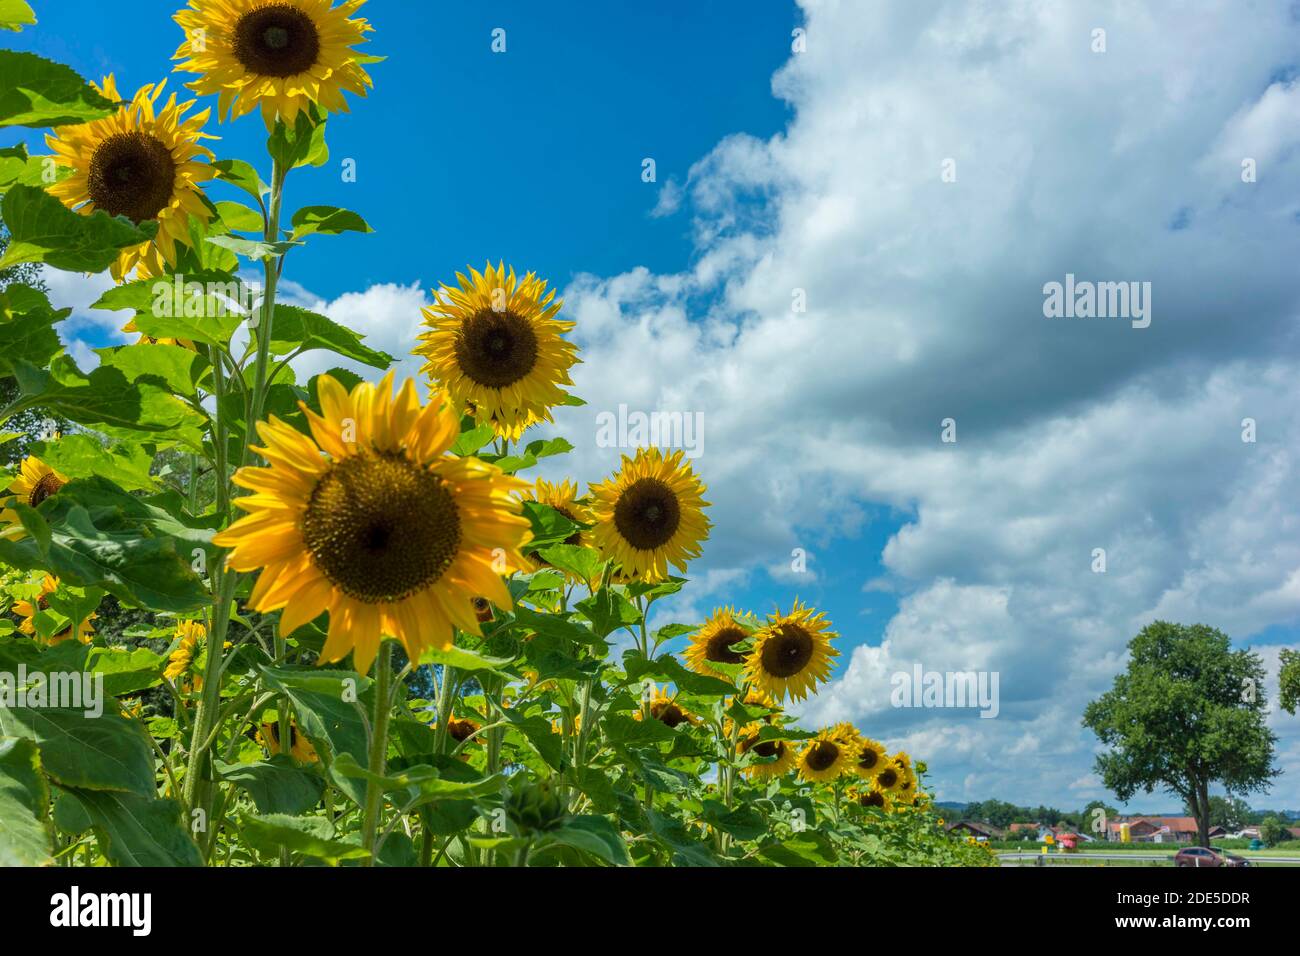 Very beautiful sunflowers against blue sky with clouds Stock Photo